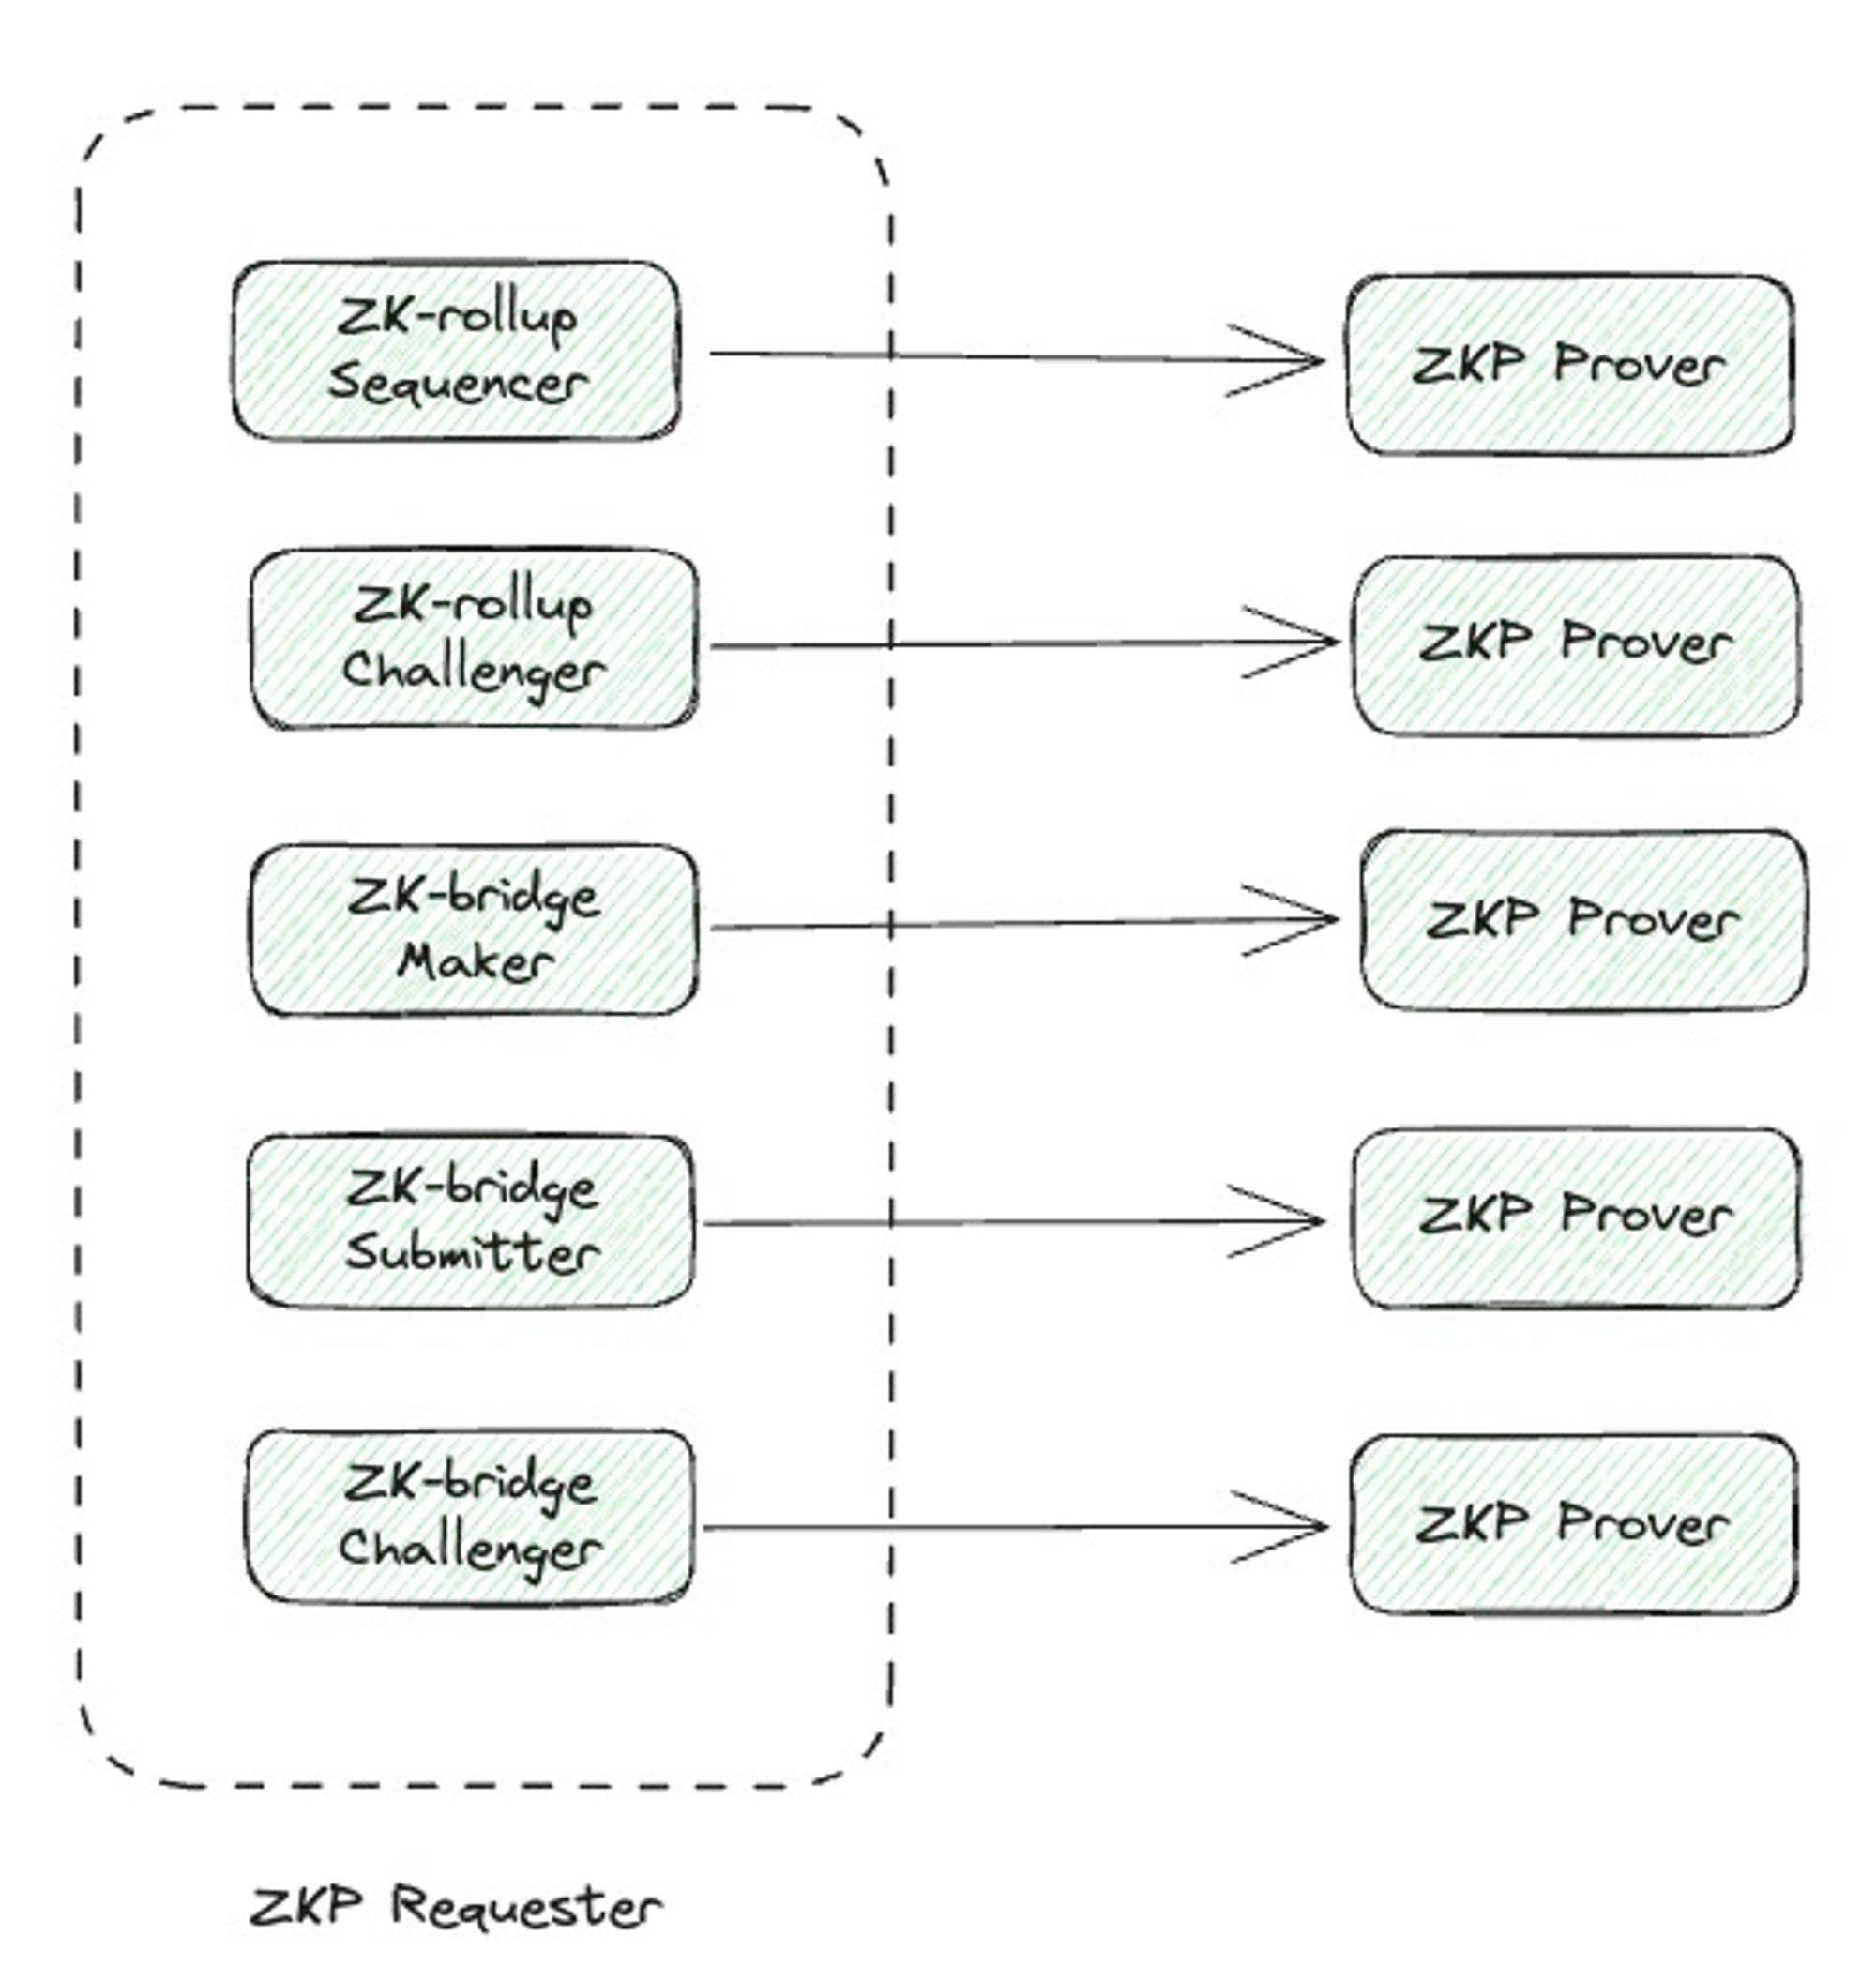 ZKP requester and ZKP provers 